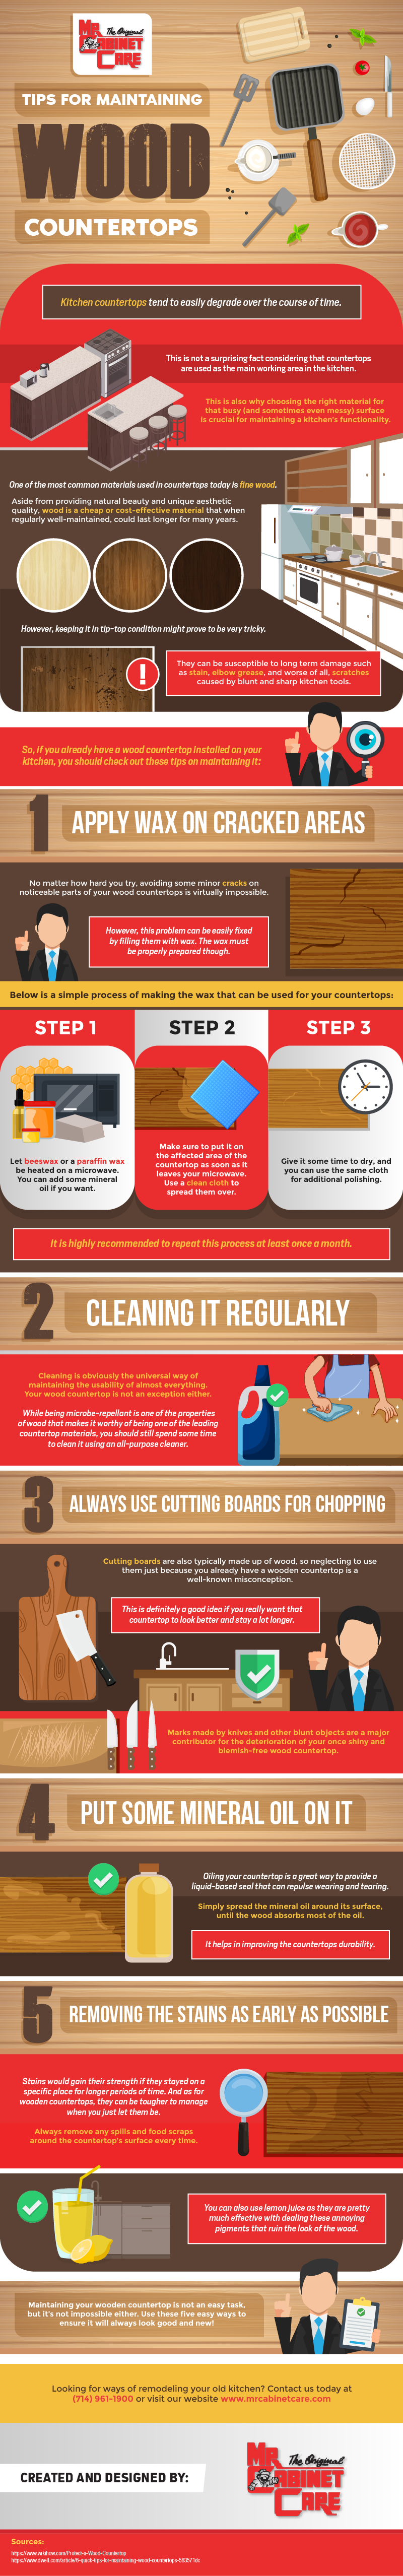 Tips for Maintaining Wood Countertops - Infographic